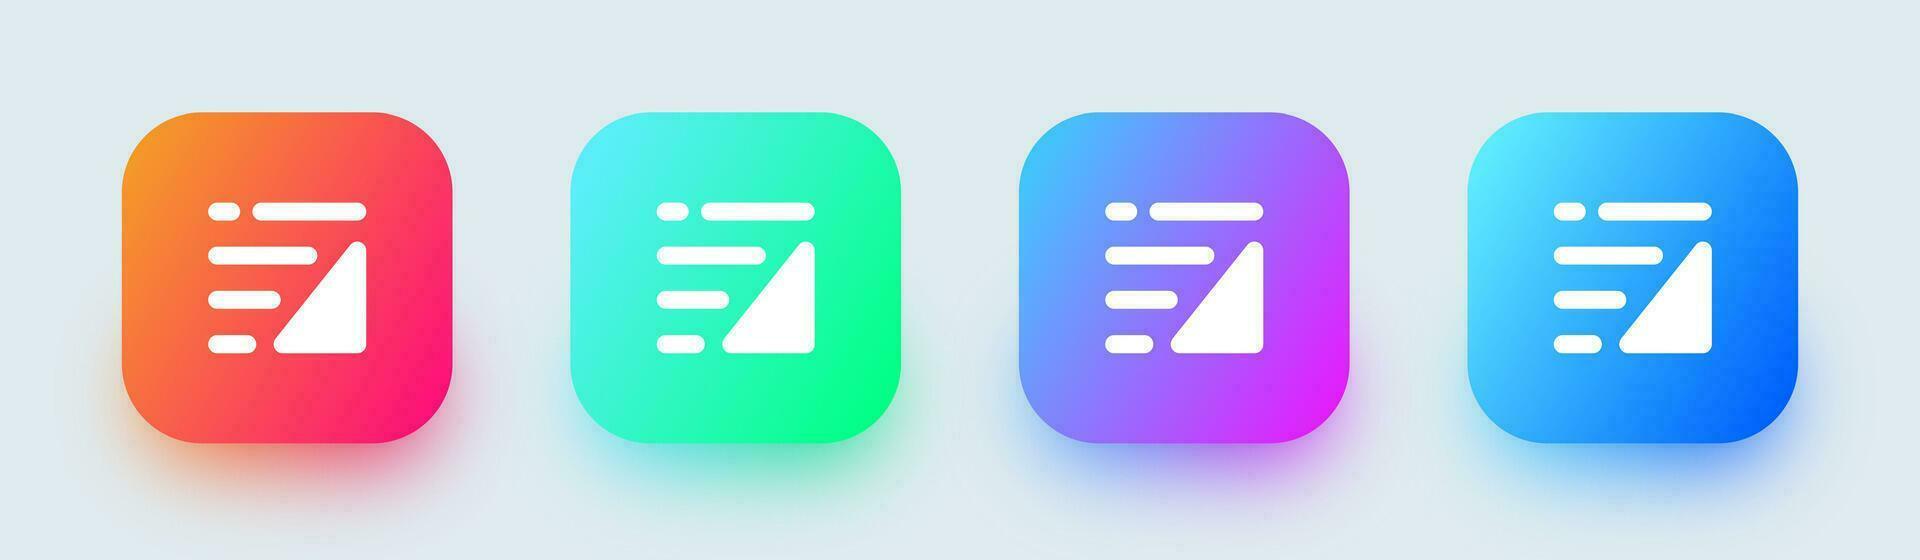 Sort solid icon in square gradient colors. Filter signs vector illustration.